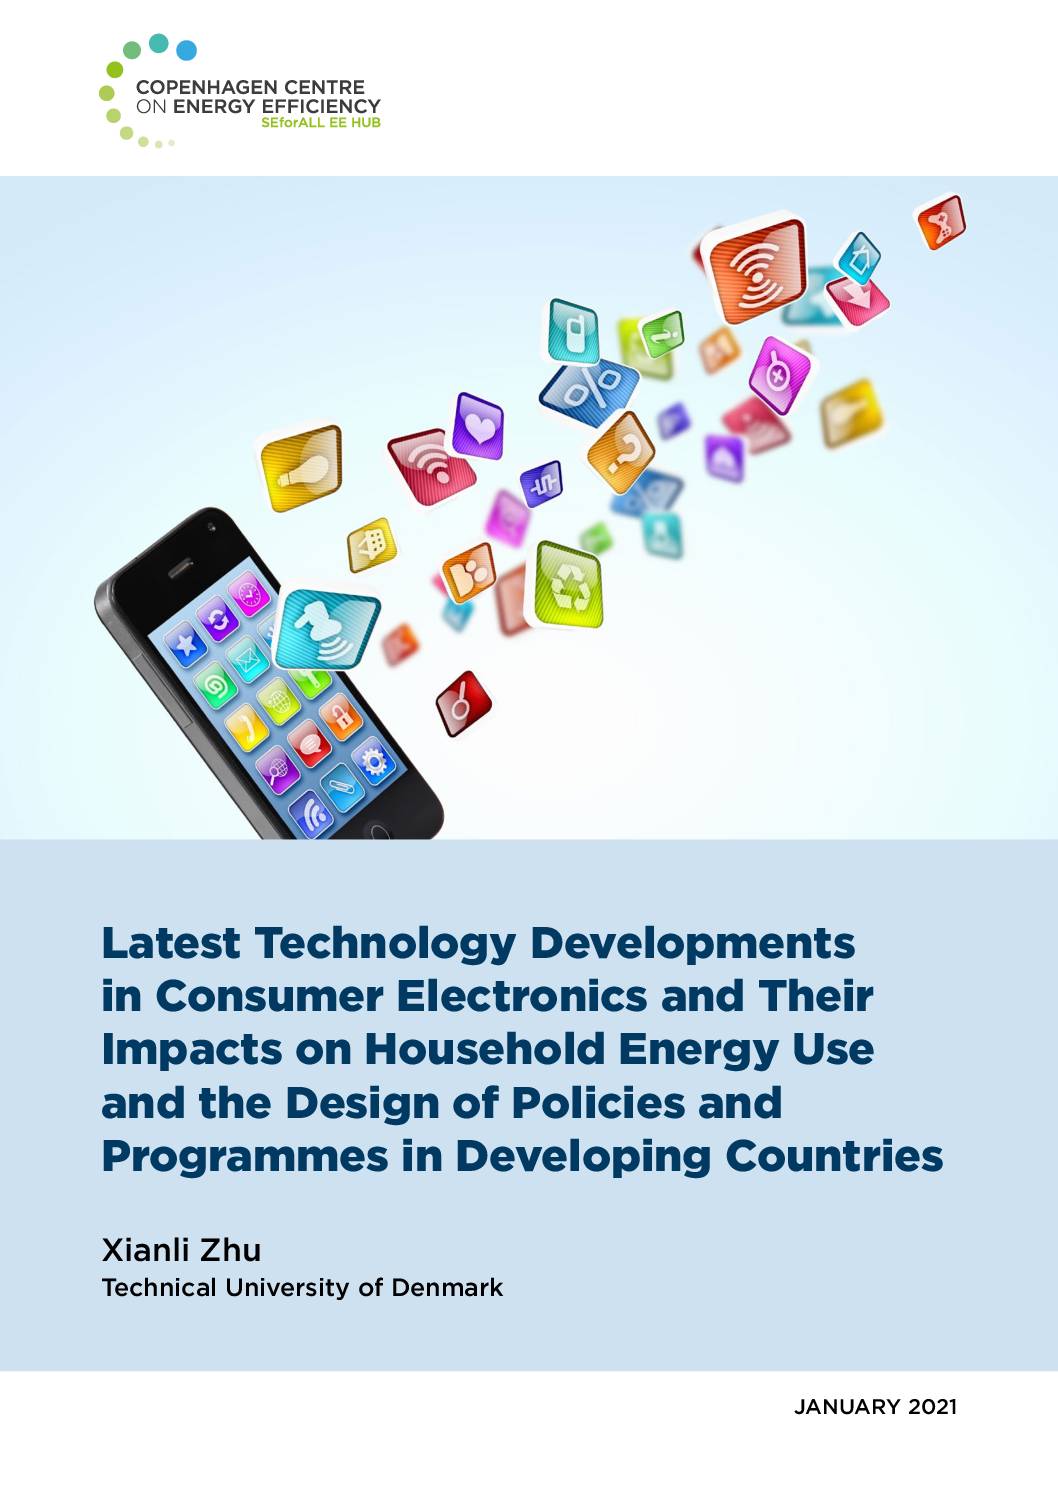 Latest Technology Developments in Consumer Electronics and Their Impacts on Household Energy Use and the Design of Policies and Programmes in Developing Countries